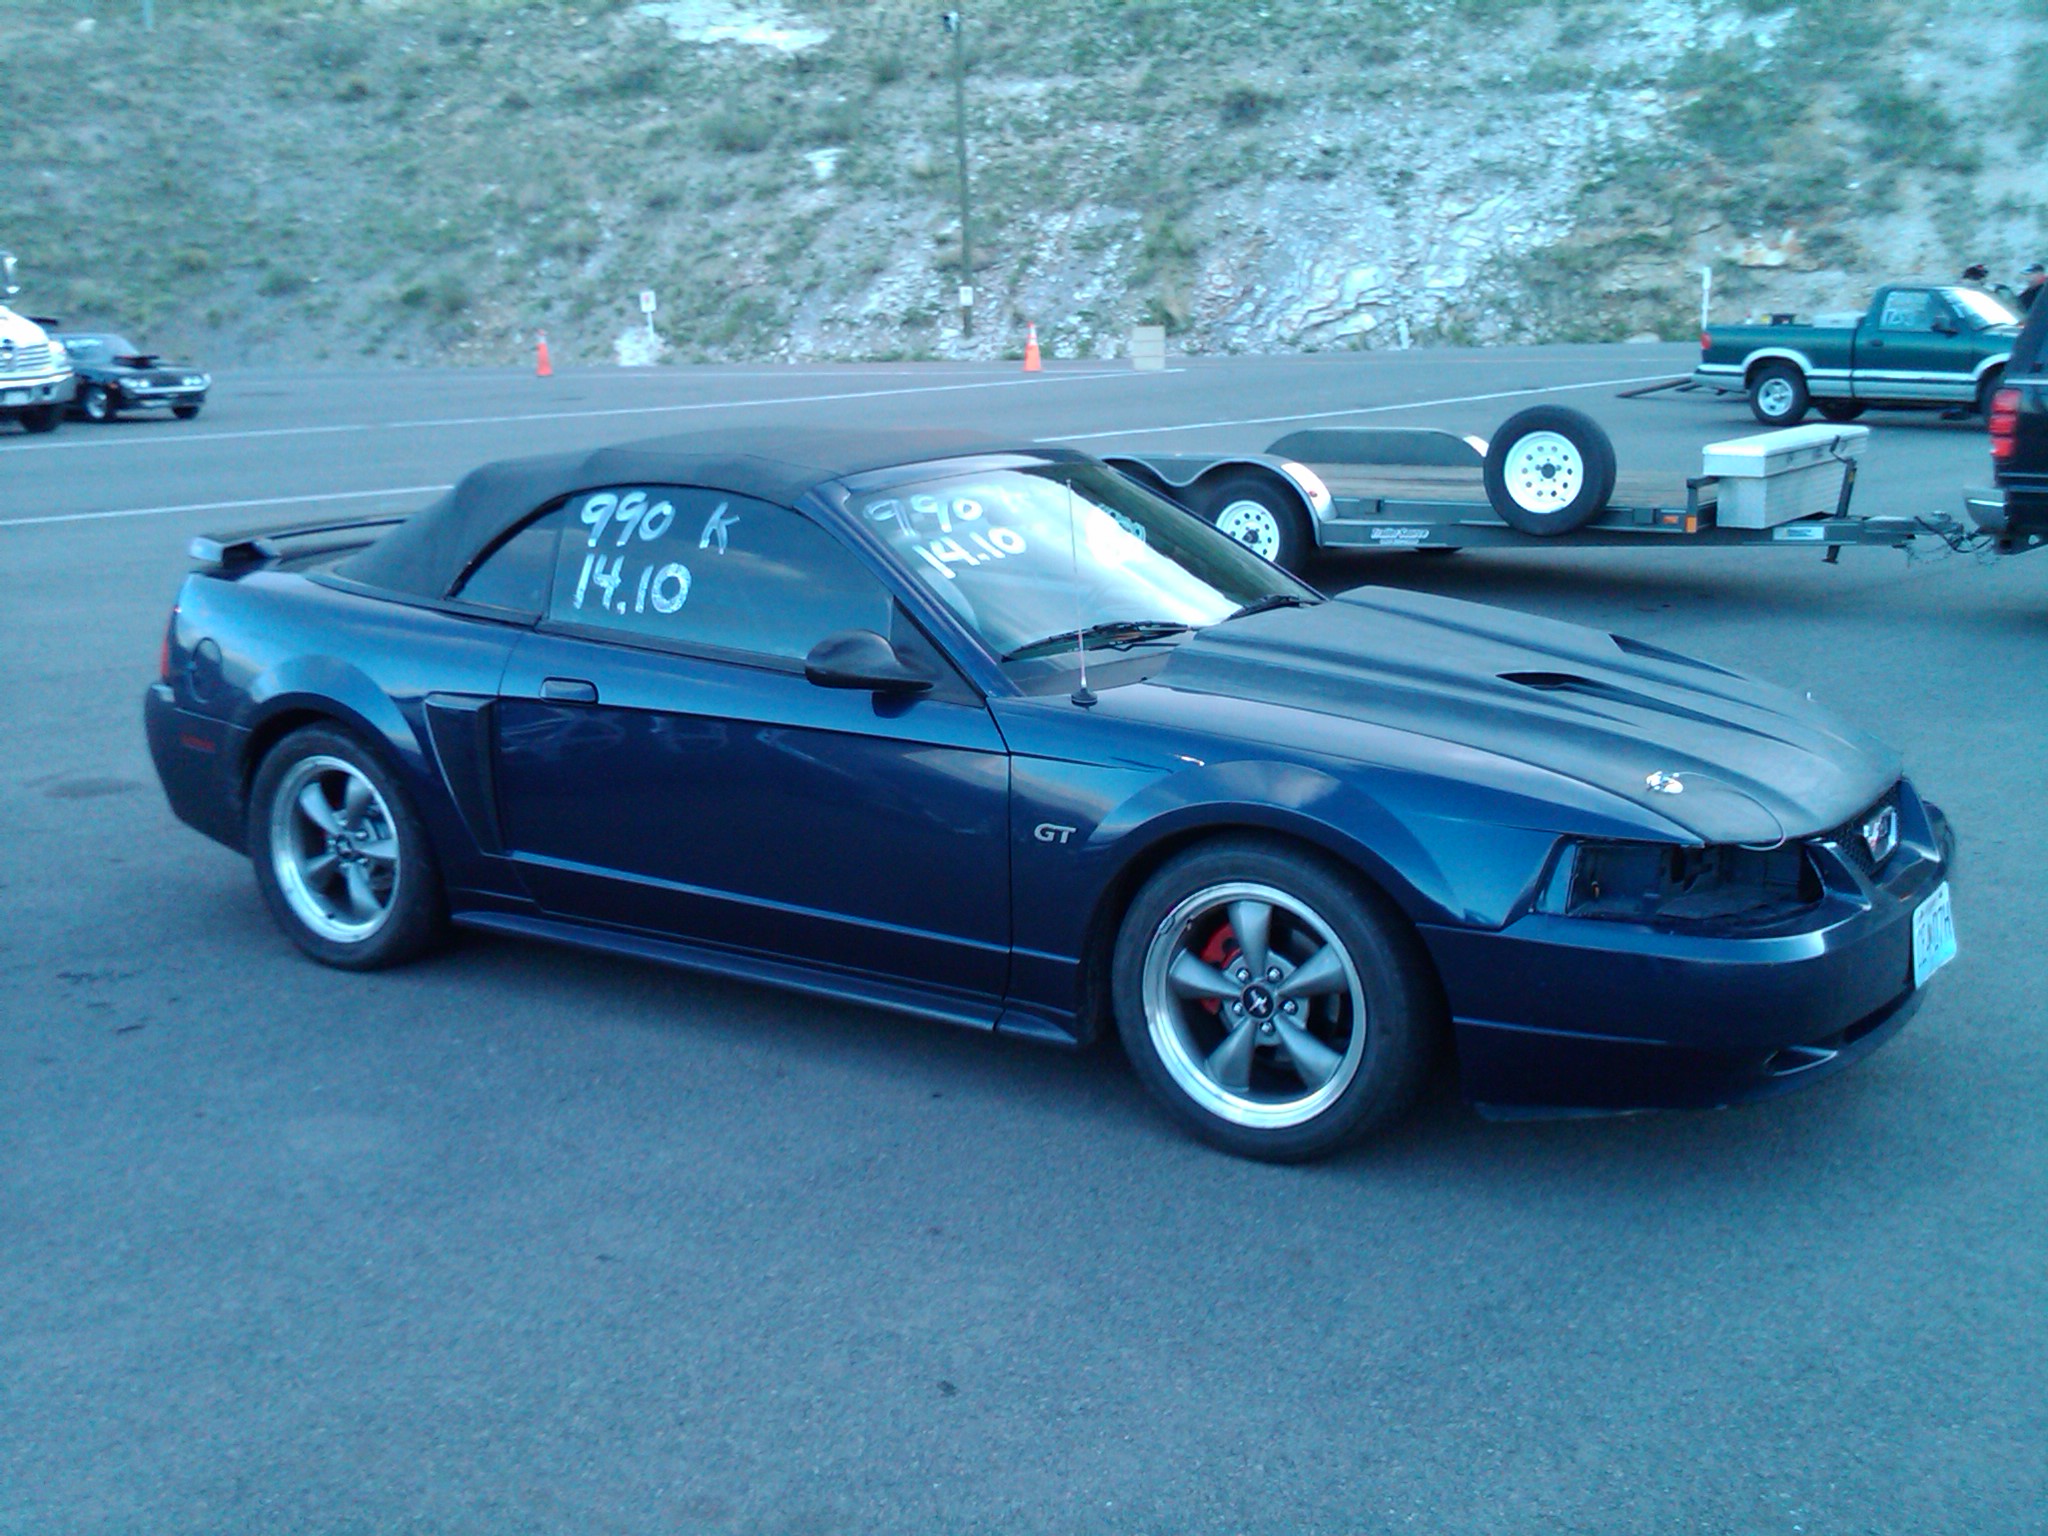 2003 Ford mustang gt quarter mile time